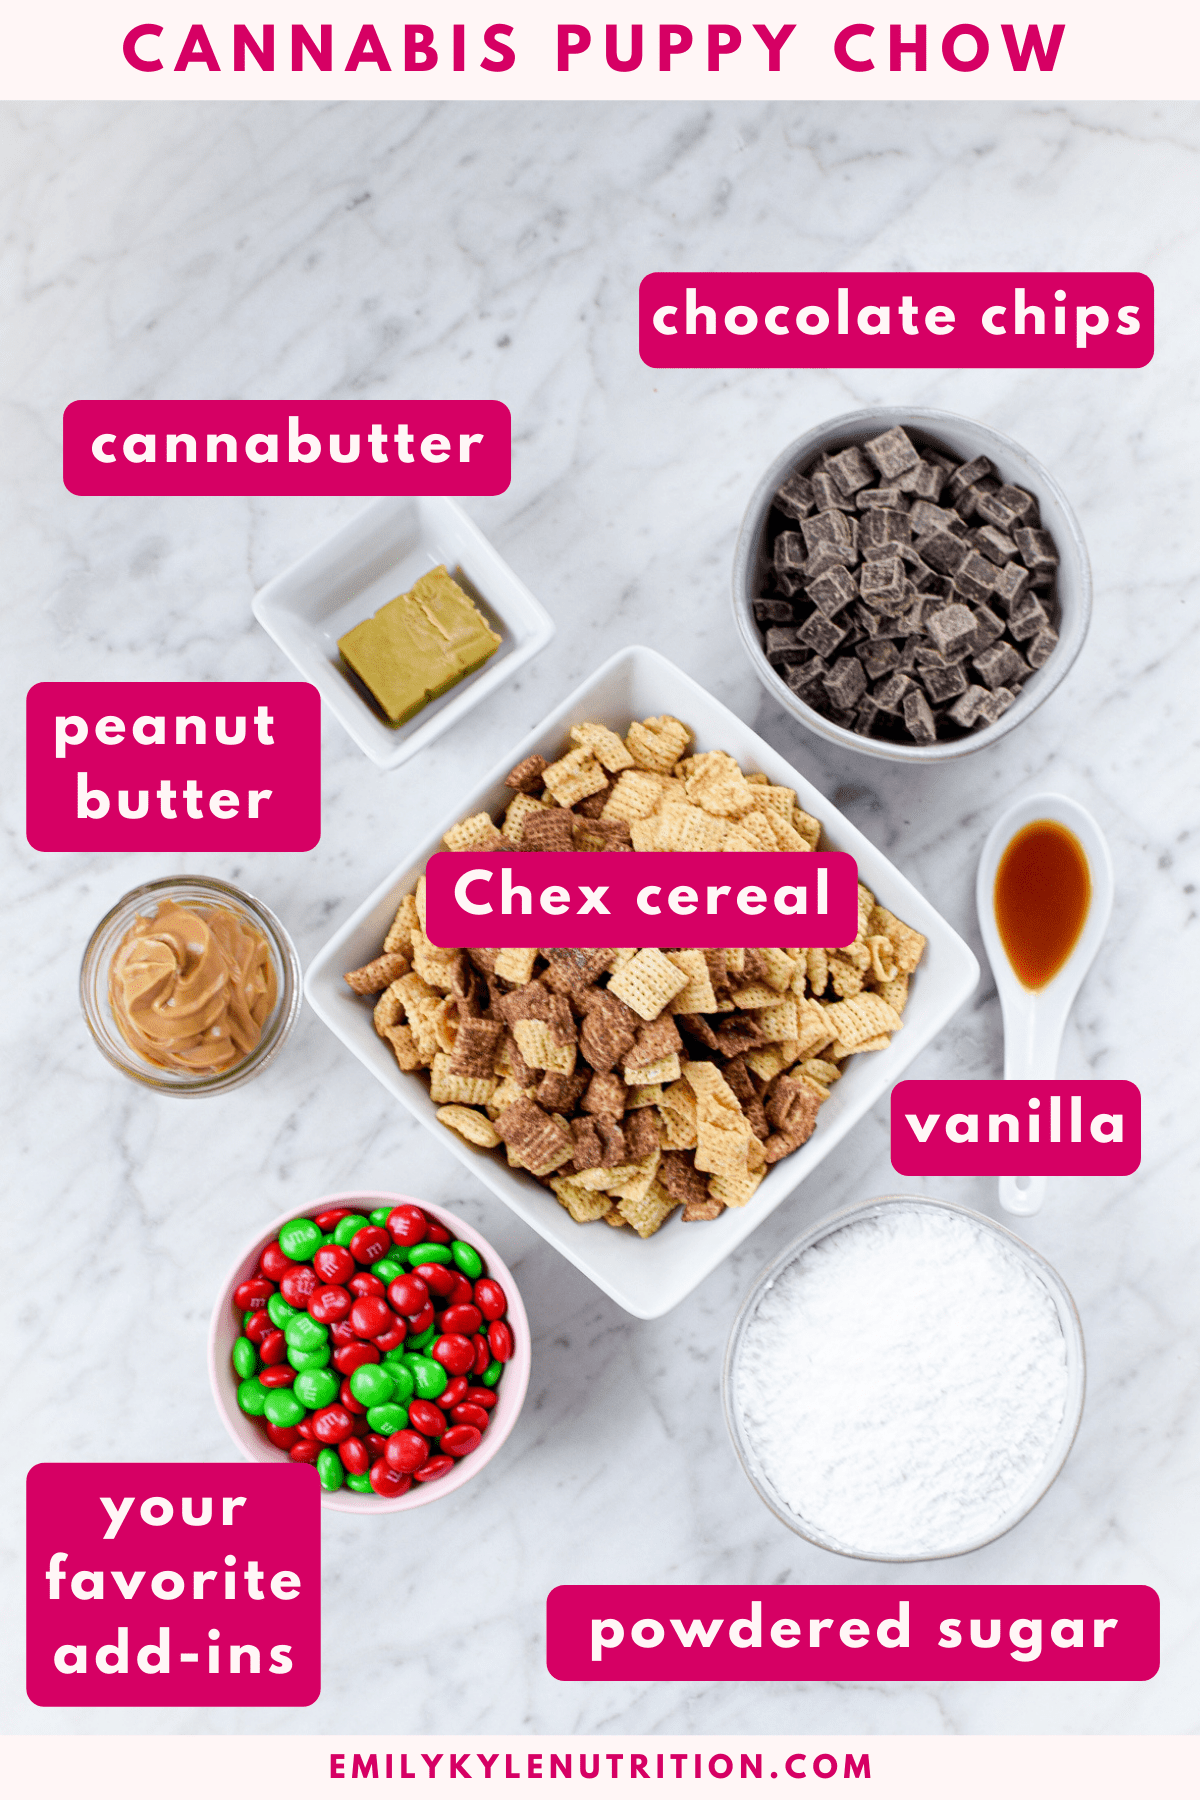 All of the ingredients needed to make cannabis puppy chow on a white countertop